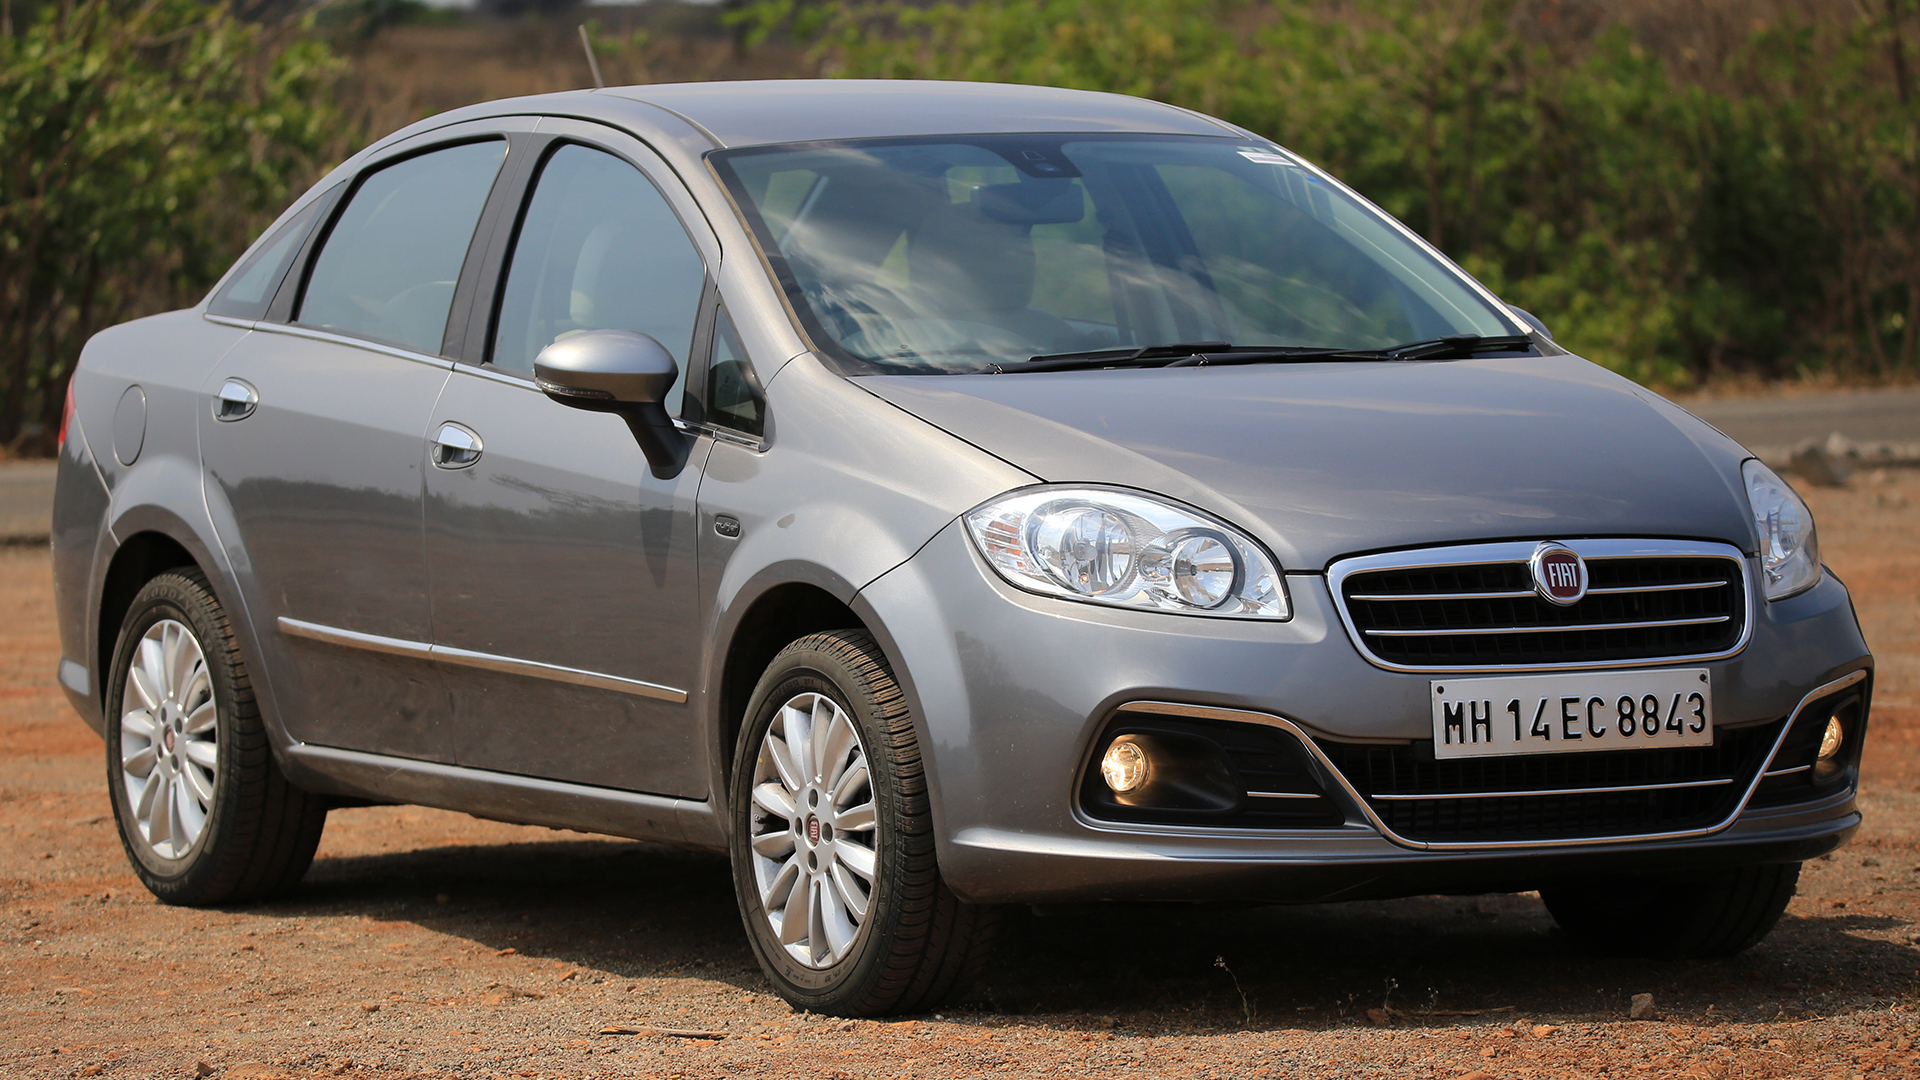 Fiat Linea 2014 Price Mileage Reviews Specification Gallery Overdrive